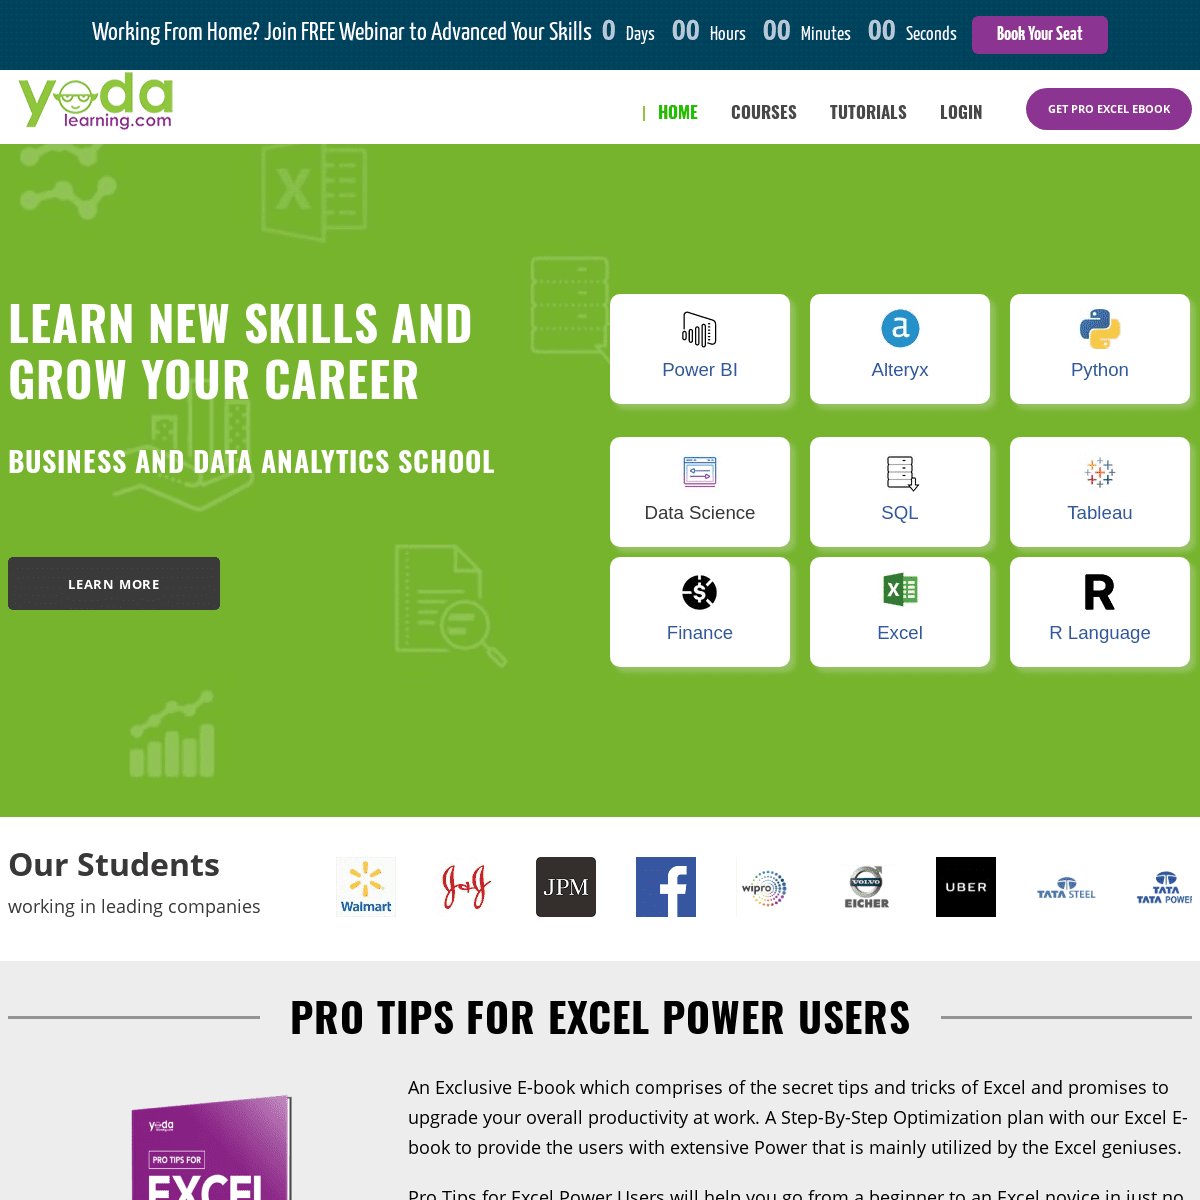 A complete backup of yodalearning.com